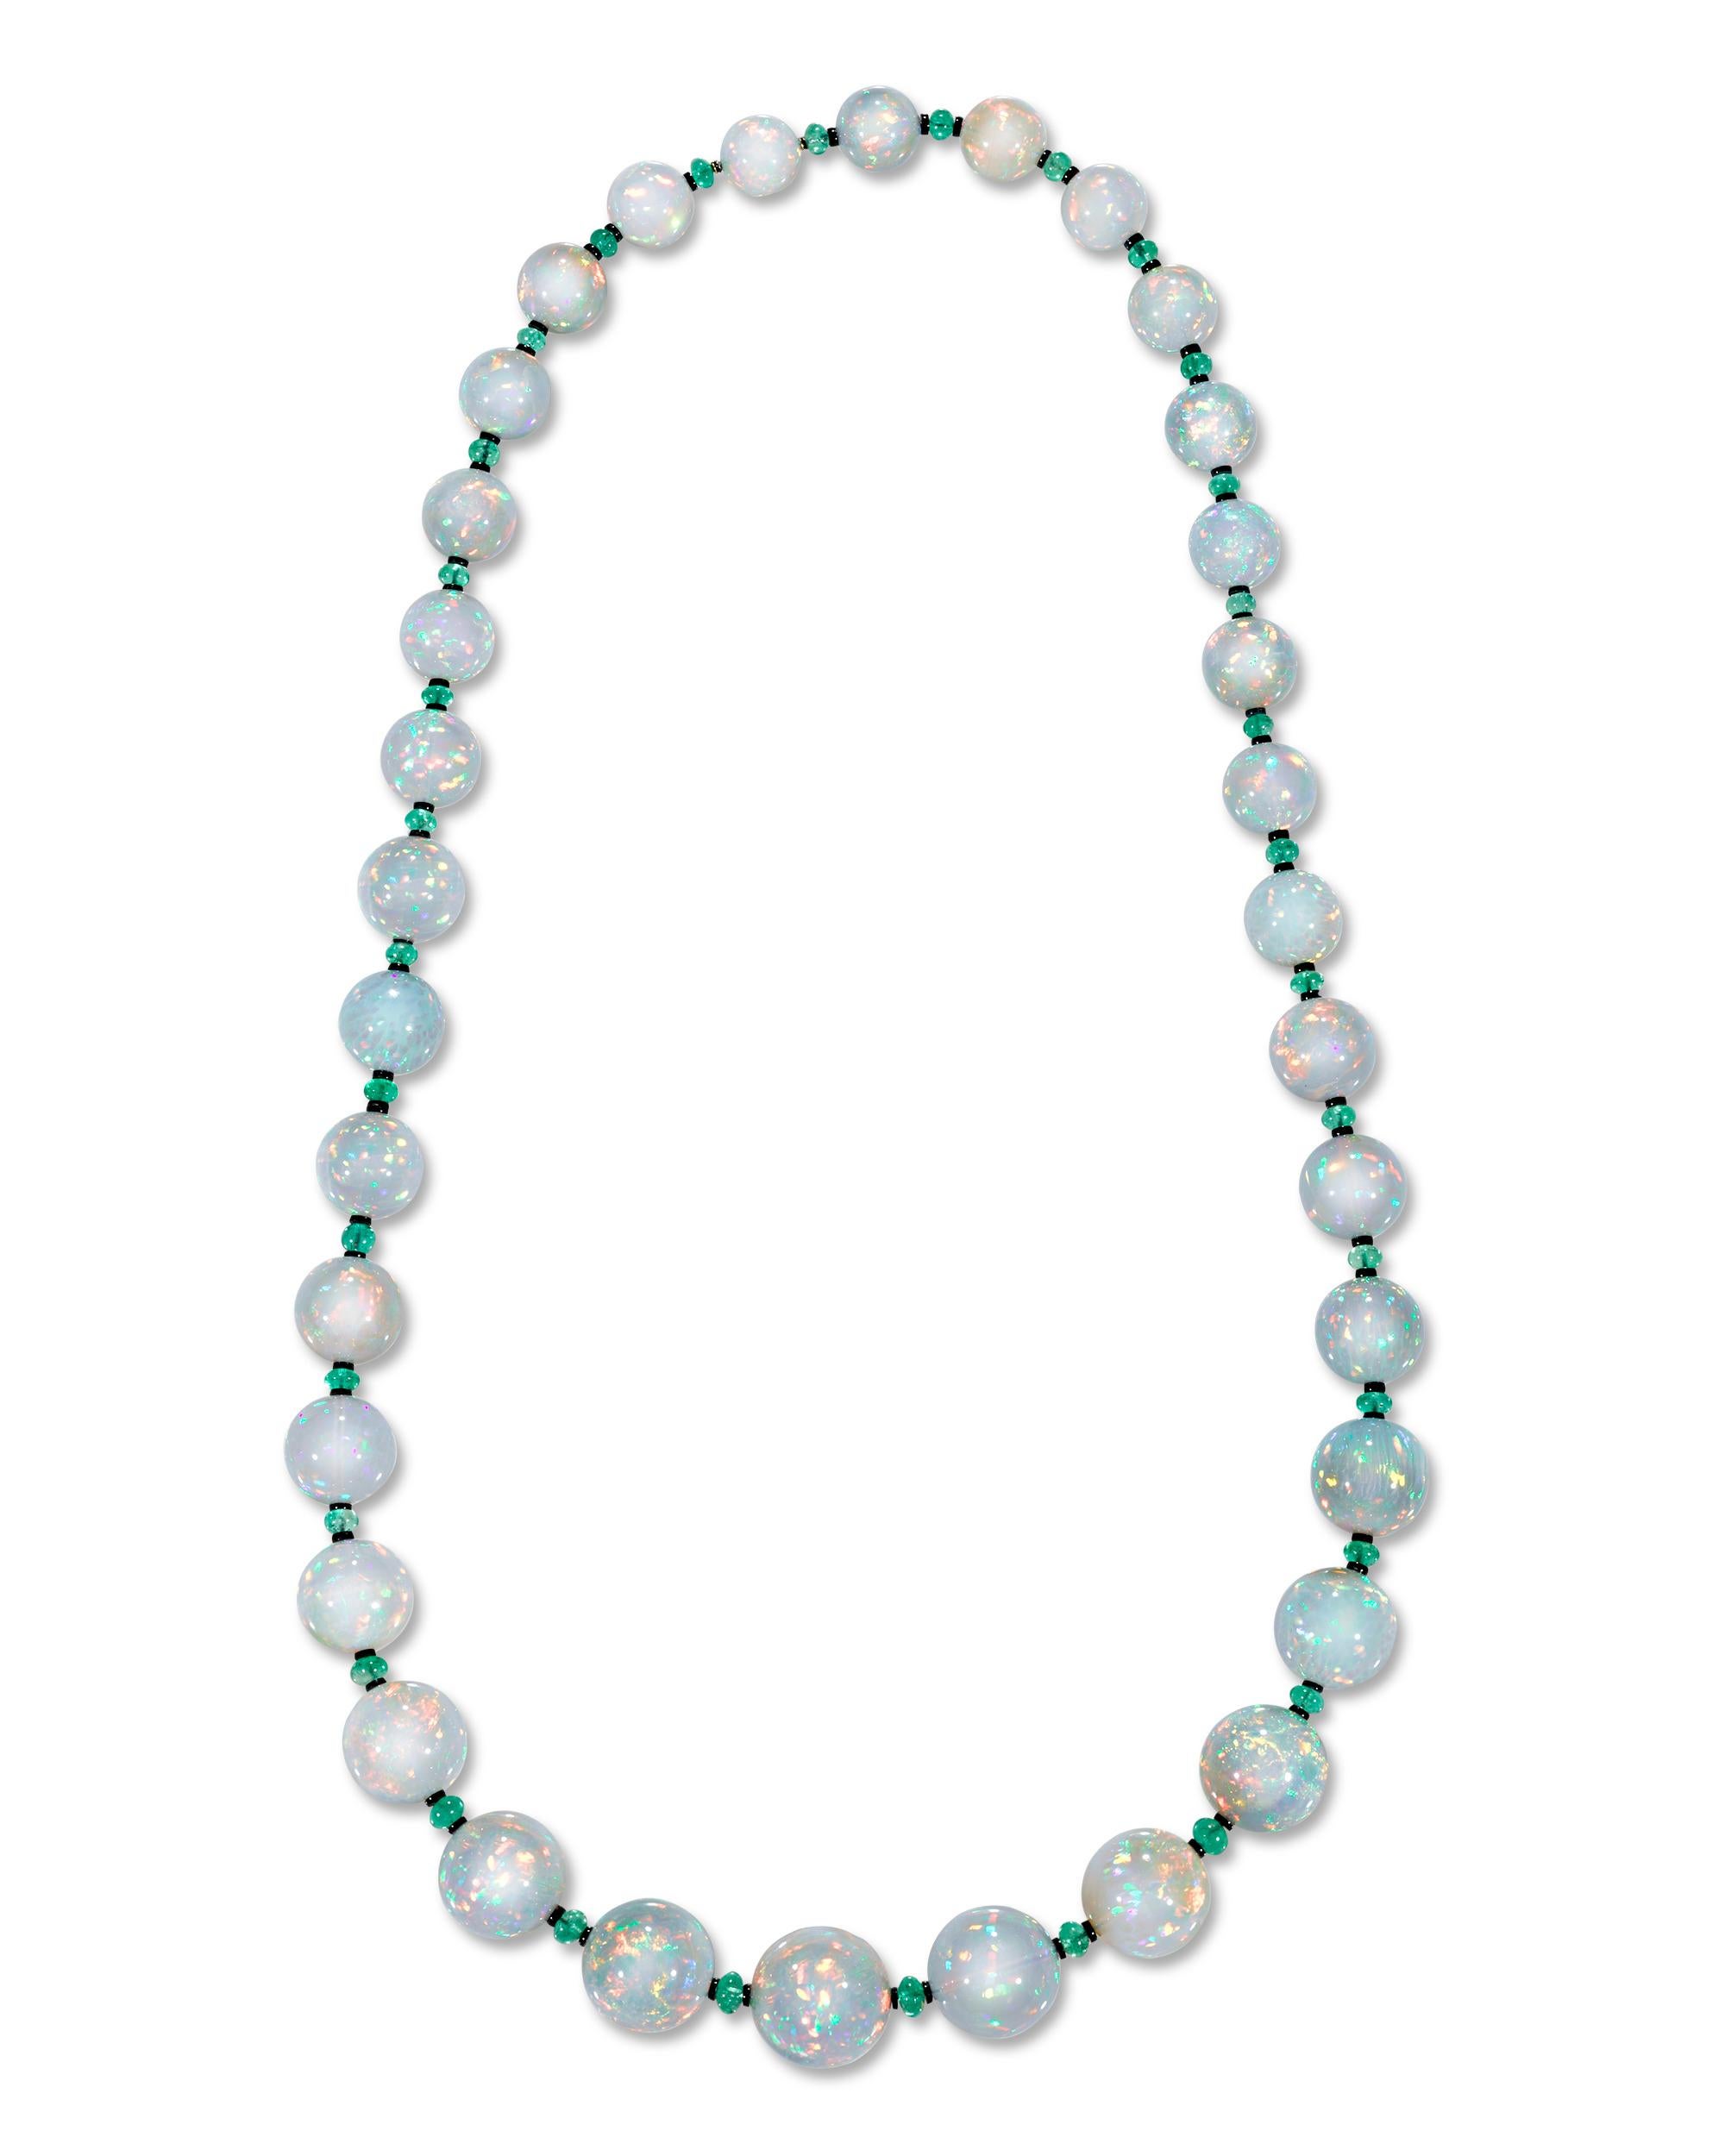 Thirty-four solid opal beads totaling approximately 680.00 carats line the length of this eye-catching necklace. The graduated gems are an impressive size and perfectly matched, with each exhibiting a high level of translucence and a rainbow of